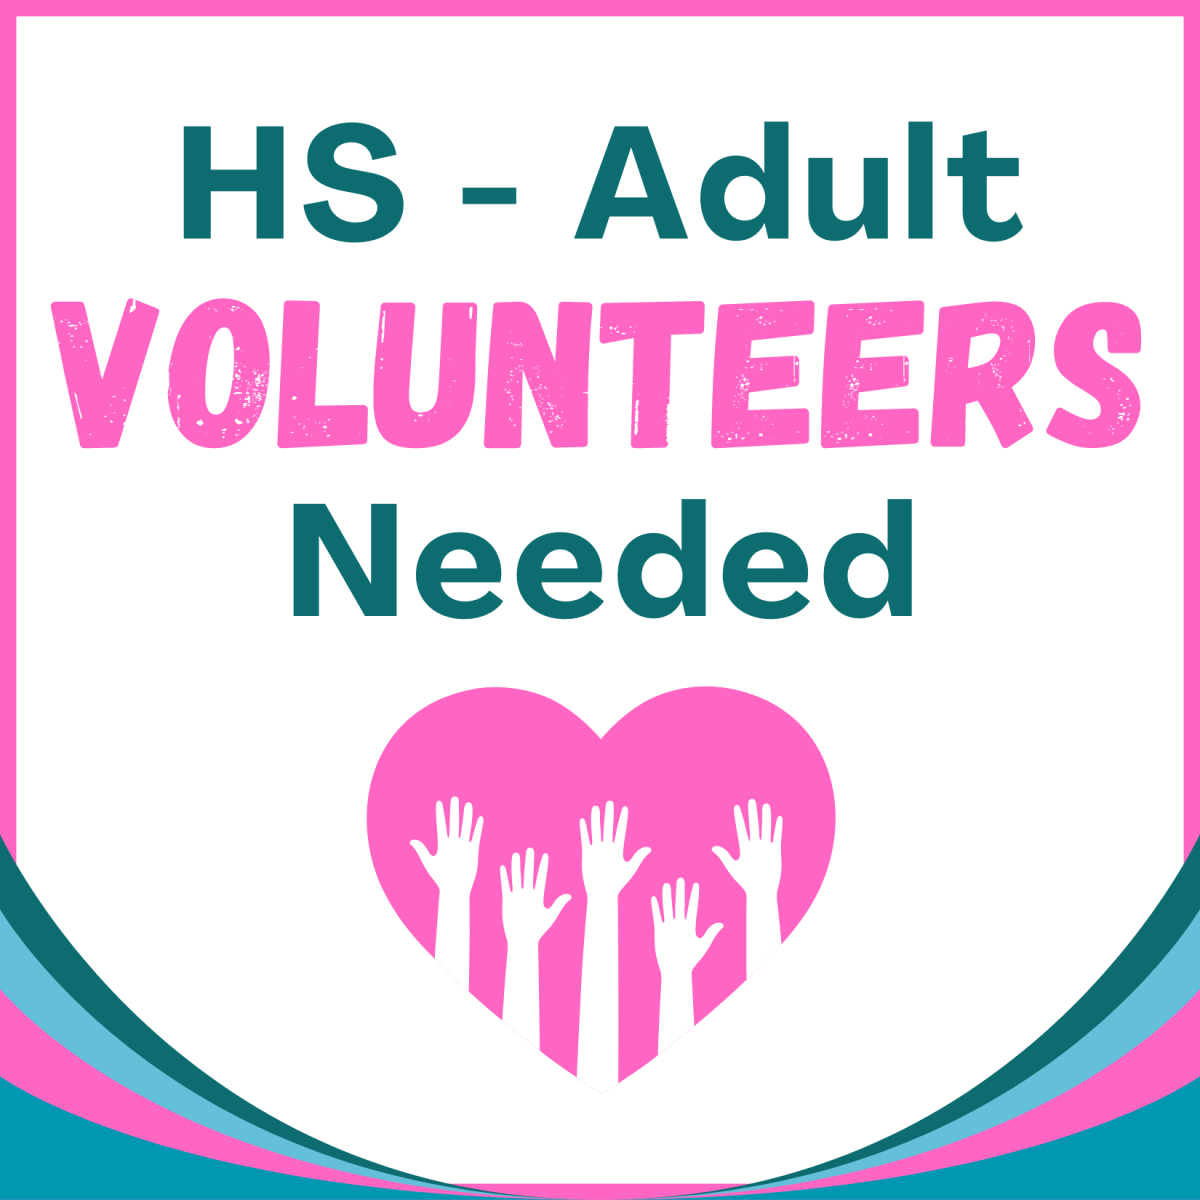 HS - Adult volunteers needed, help, volunteer, give back, prospect heights public library, prospect heights, district 214